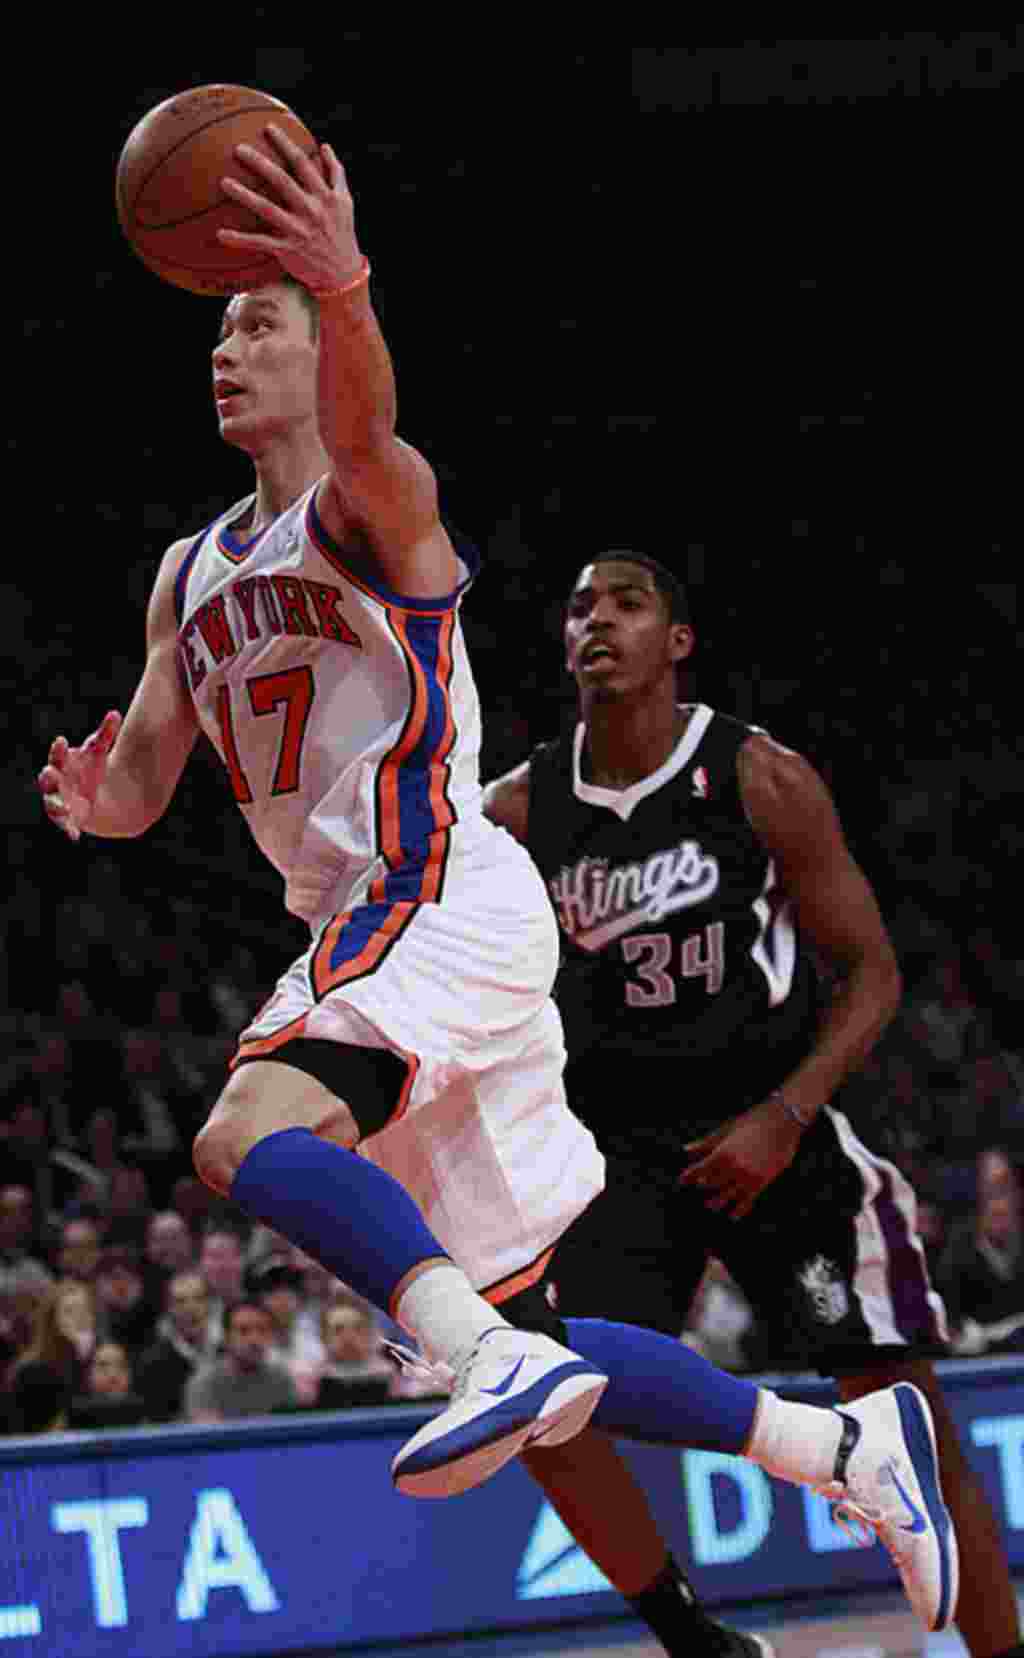 New York Knicks' Jeremy Lin drives past Sacramento Kings' Jason Thompson during the first half of an NBA basketball game on February 15, 2012, in New York. (AP)